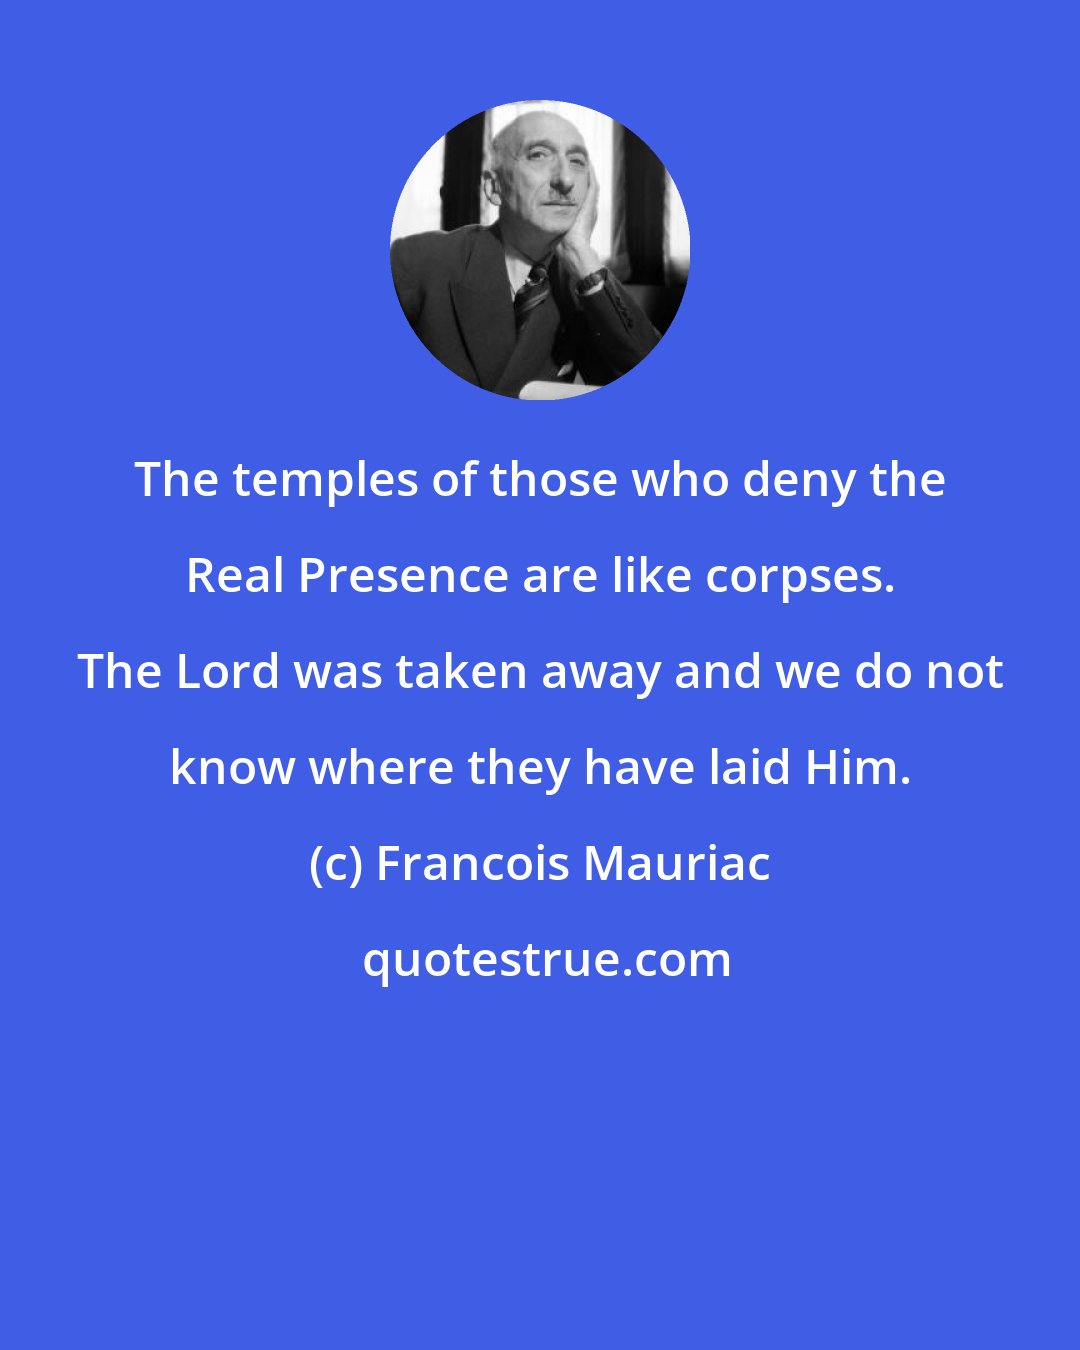 Francois Mauriac: The temples of those who deny the Real Presence are like corpses. The Lord was taken away and we do not know where they have laid Him.